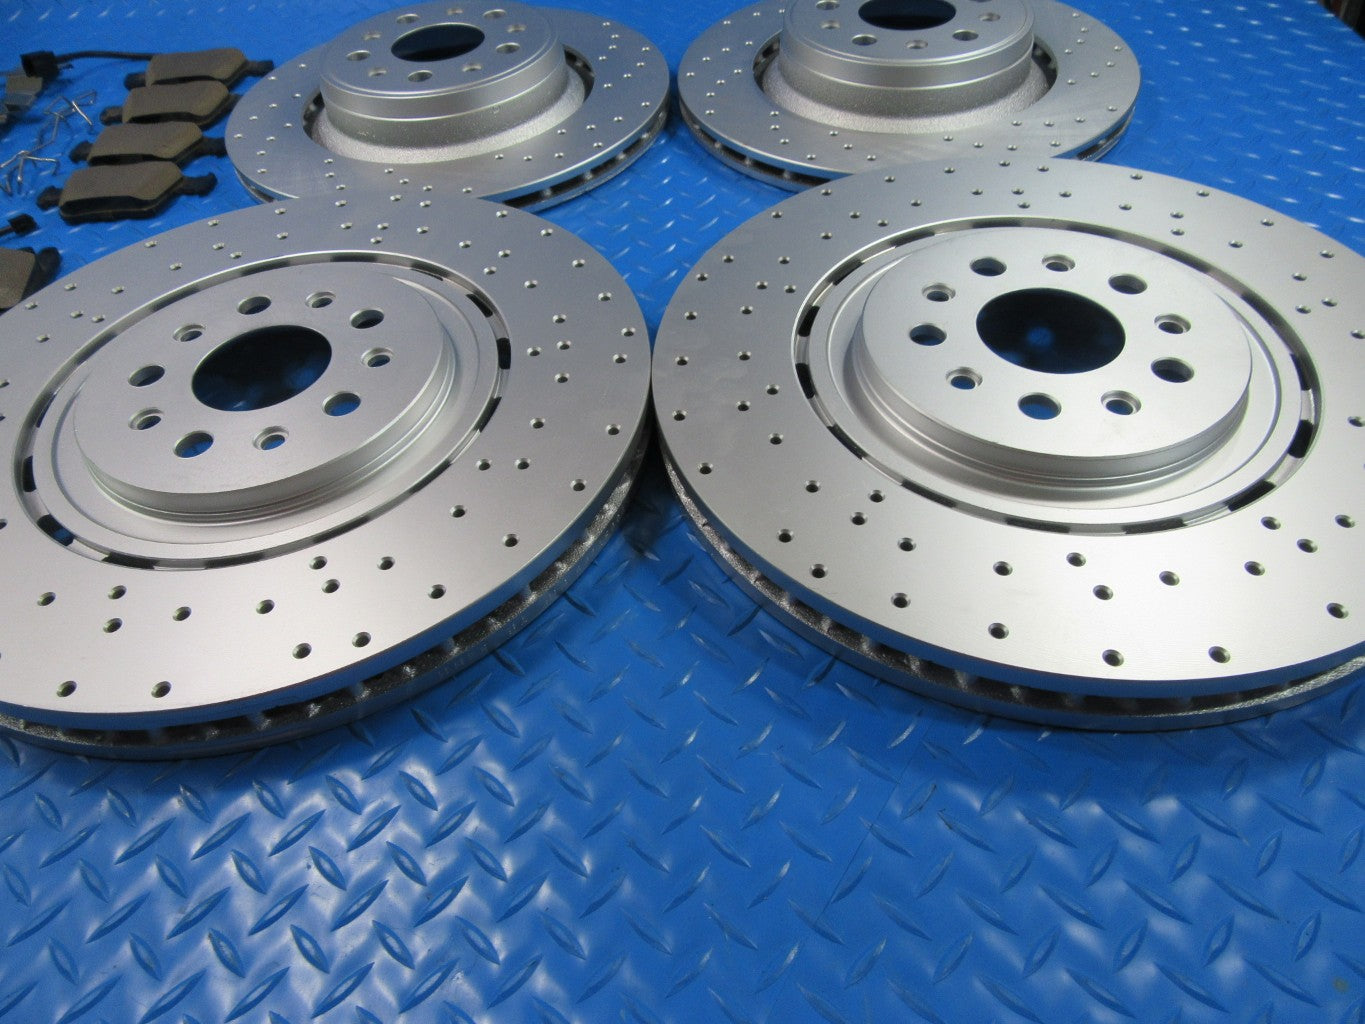 Maserati Levante S front rear brake pads and rotors drilled TopEuro #7355 Wholesale